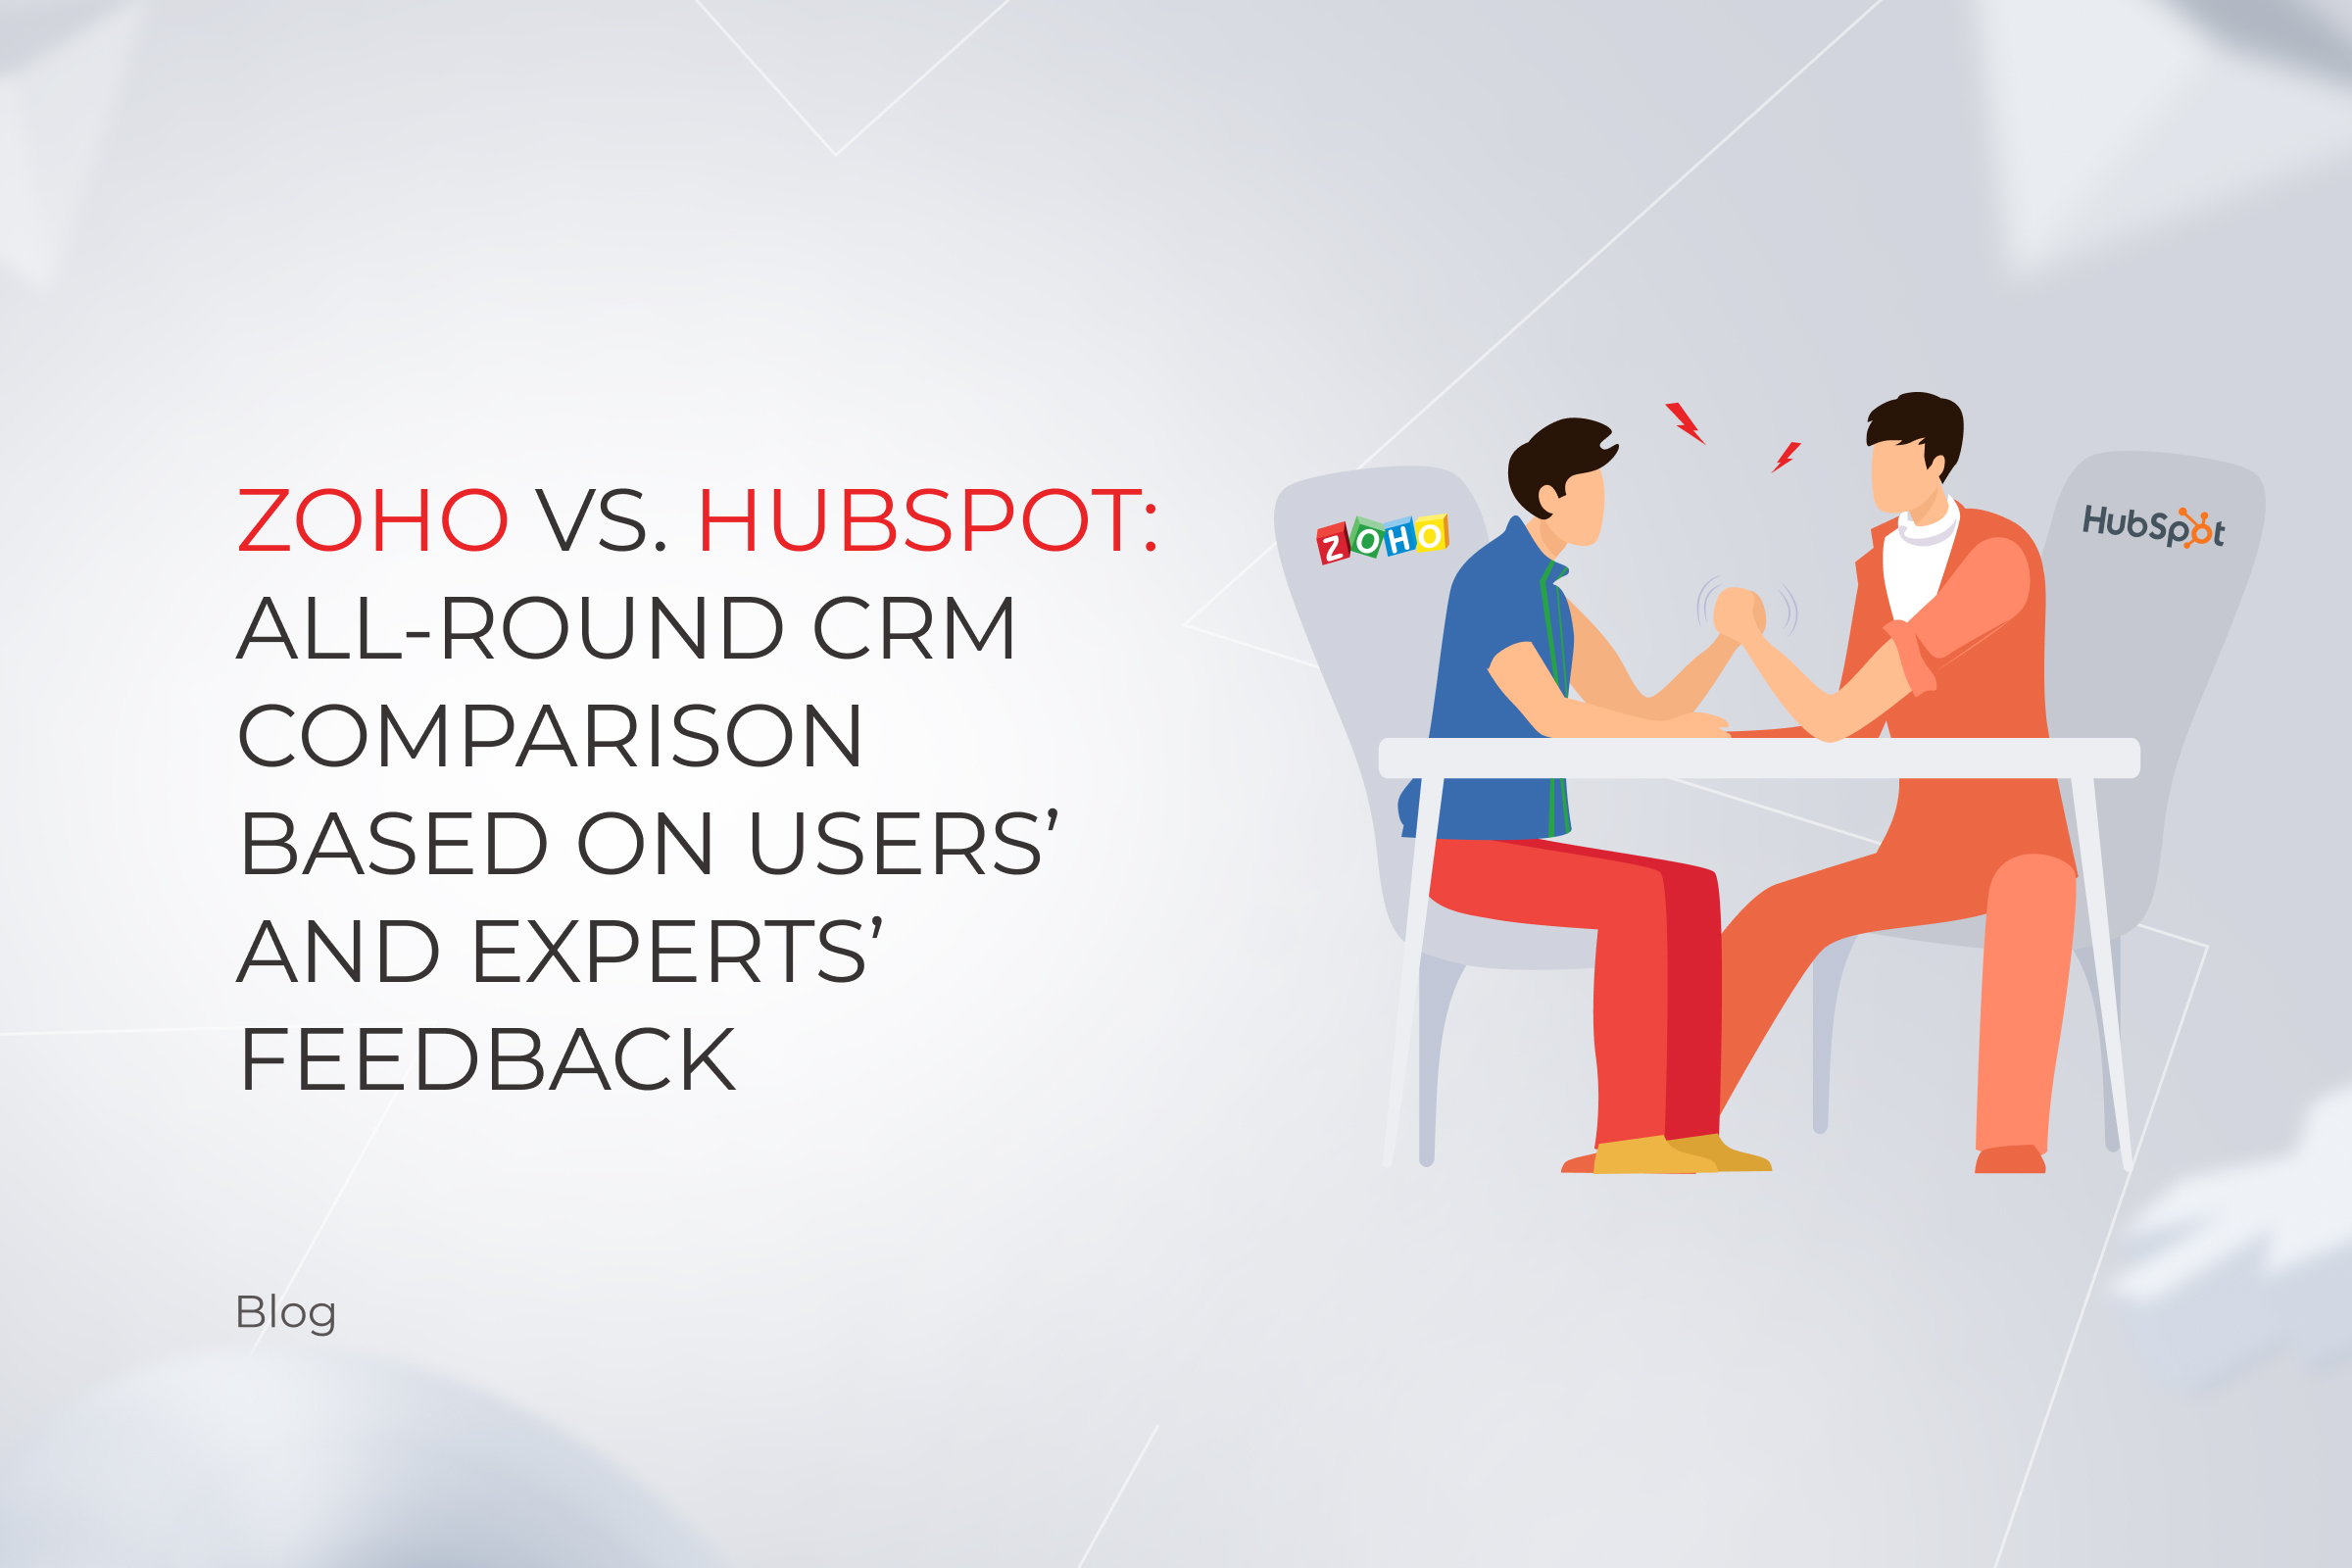 Zoho vs. HubSpot: All-round CRM Comparison Based On Users’ and Experts’ Feedback